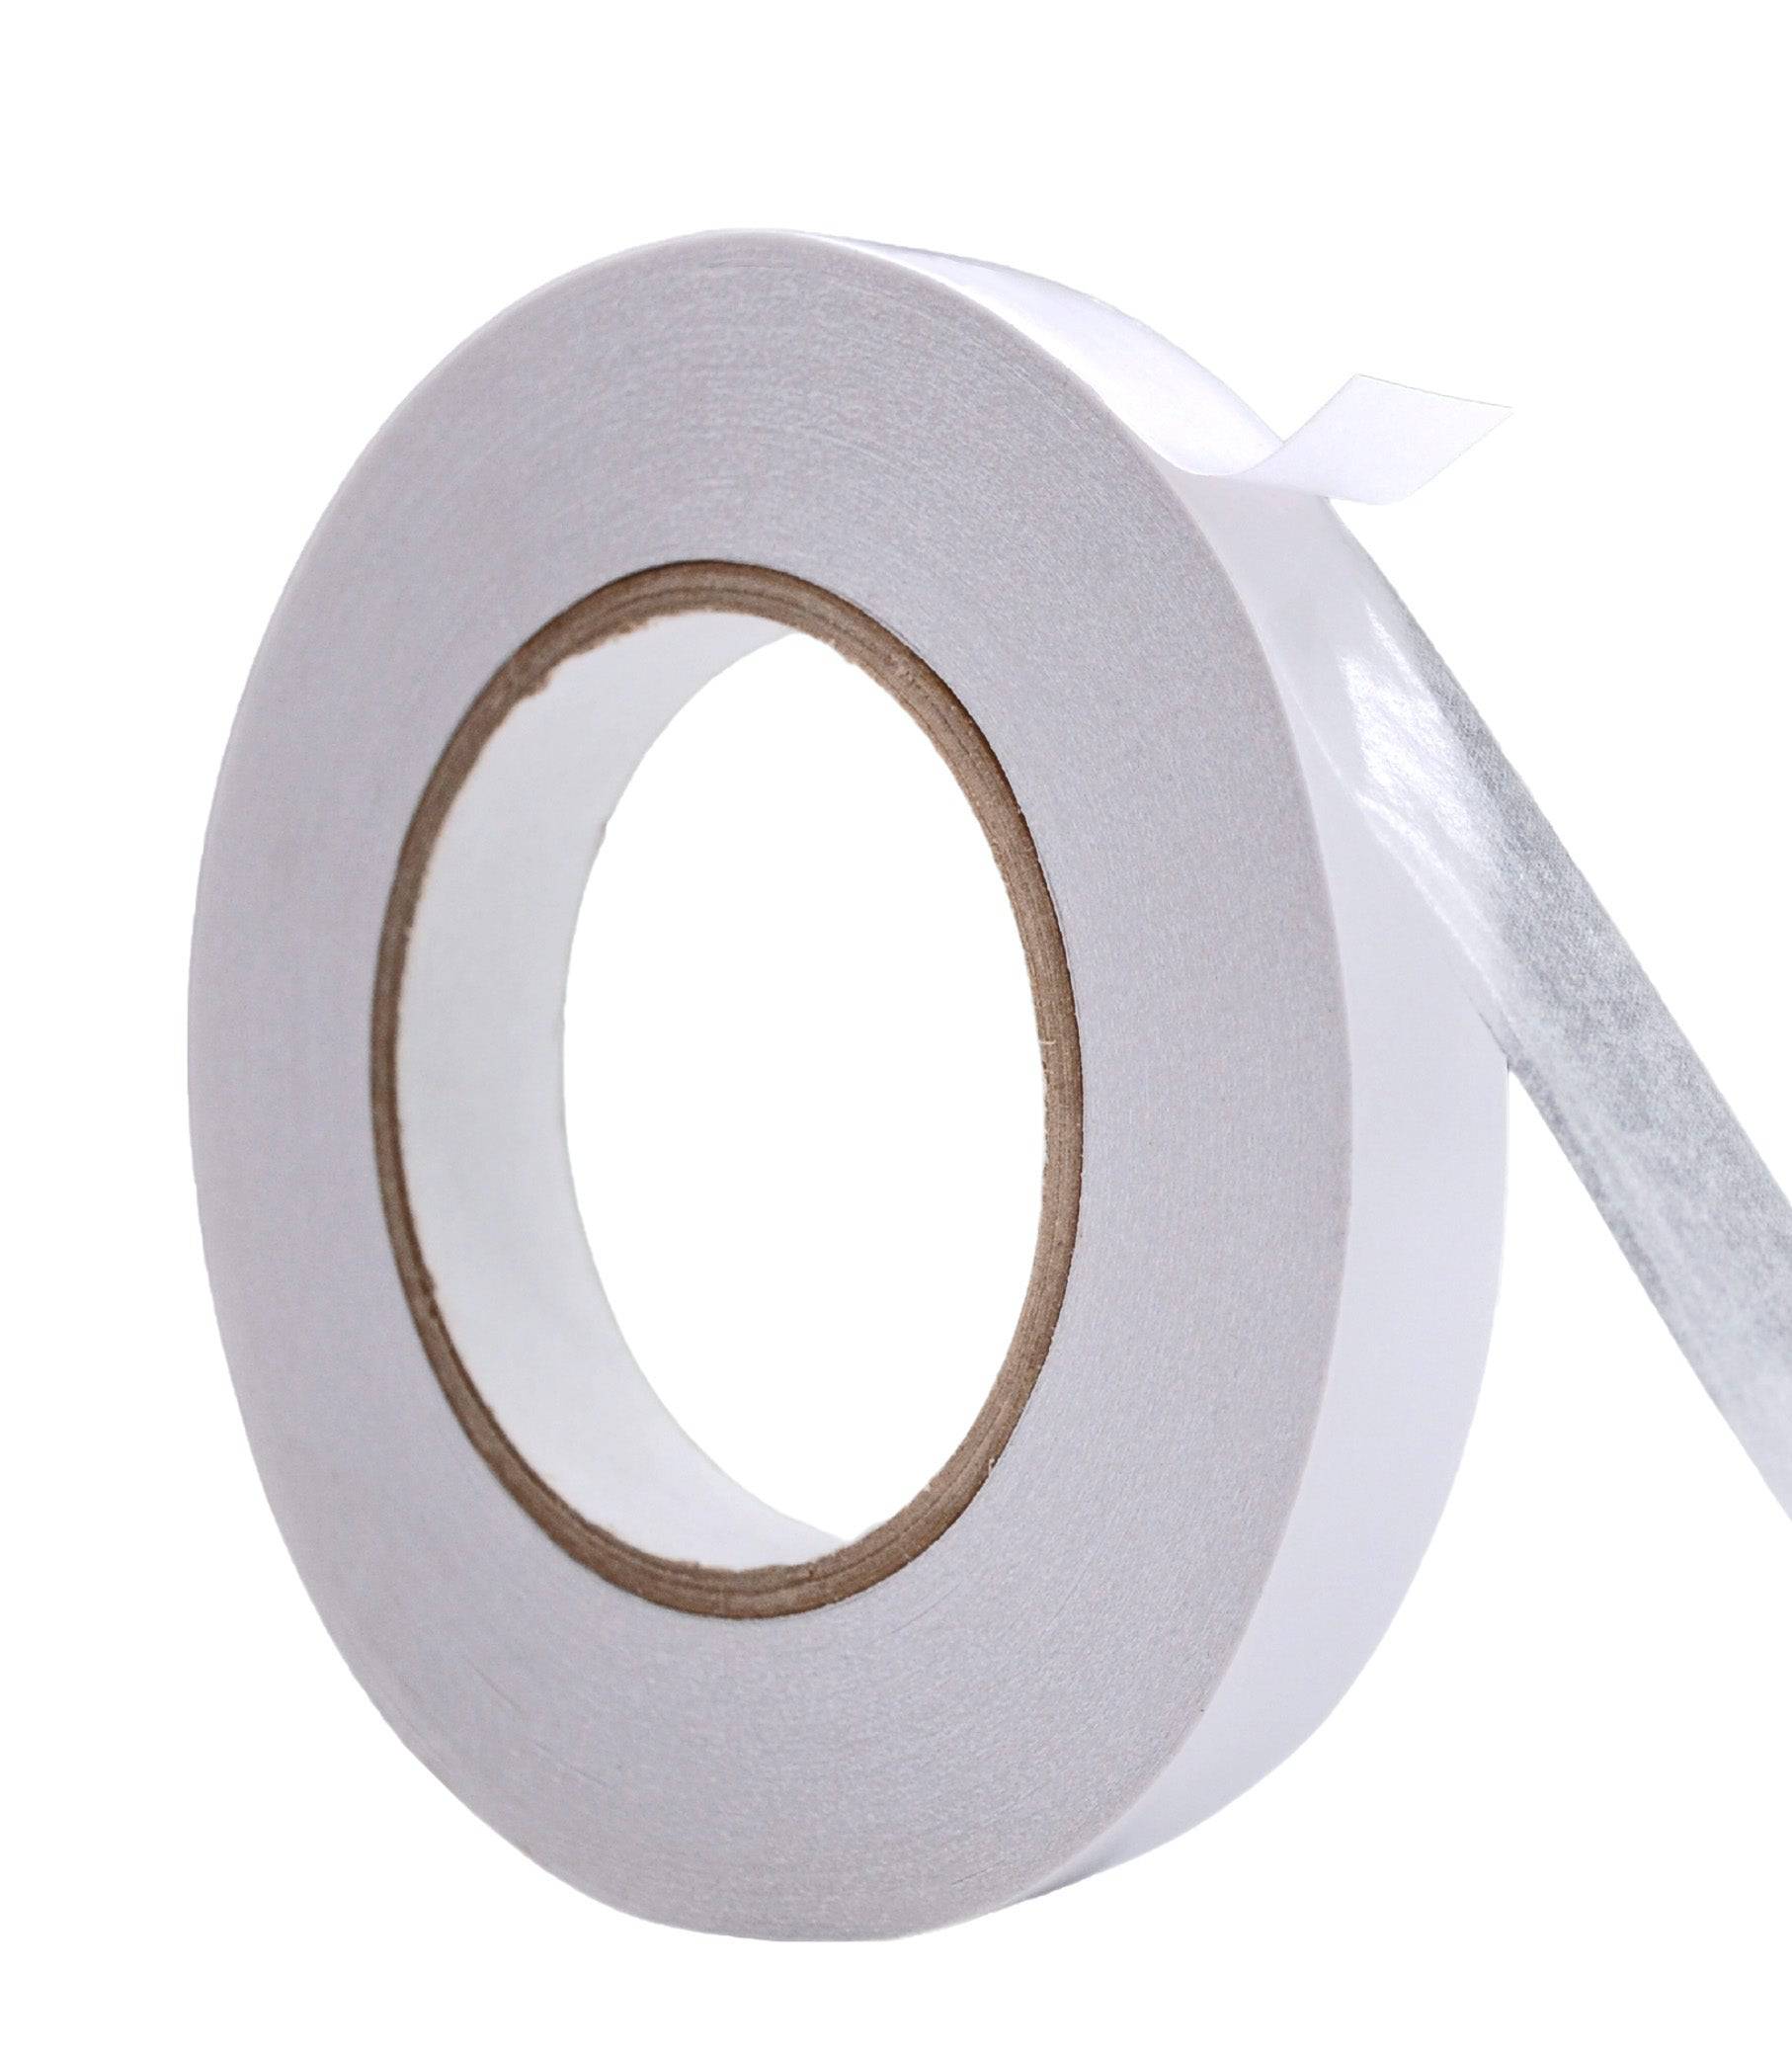 Buy the Craft Double-Sided Tape 3mm x 25m Roll online at Scrap Dragon. All  orders ships next business day. Free AUS delivery over $75.